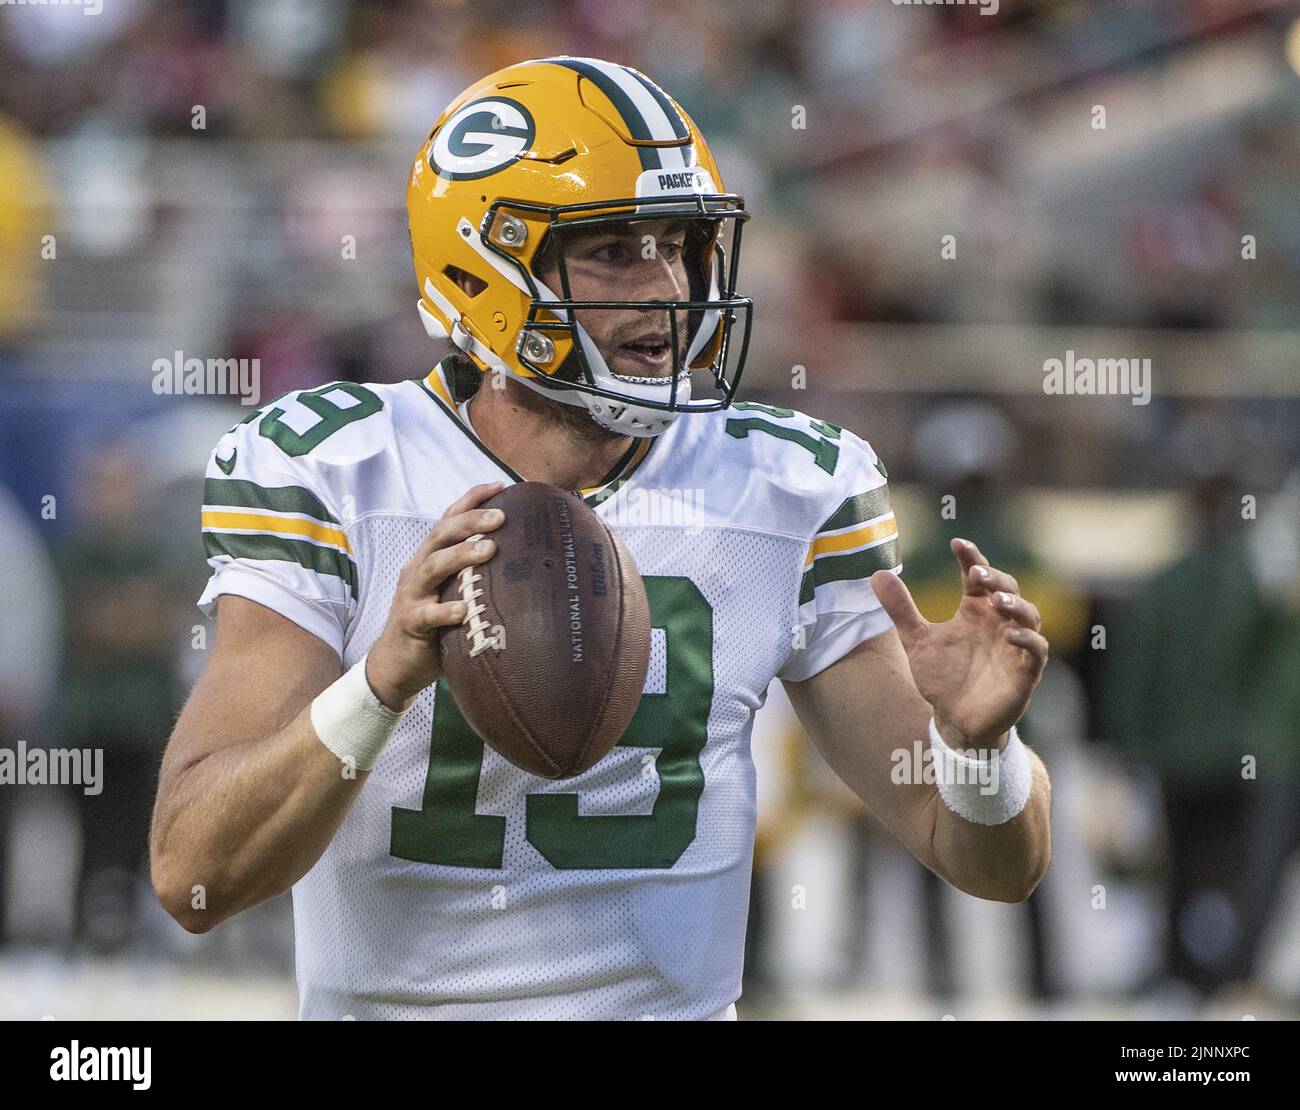 Santa Clara, USA. 13th Aug, 2022. Green Bay Packers quarterback Danny Etling (19) throws against the San Francisco 49ers in the third quarter at Levi's Stadium in Santa Clara, California on Friday, August 12, 2022. The 49ers defeated the Packers 28-21 in their first preseason game Photo by Terry Schmitt/UPI Credit: UPI/Alamy Live News Stock Photo